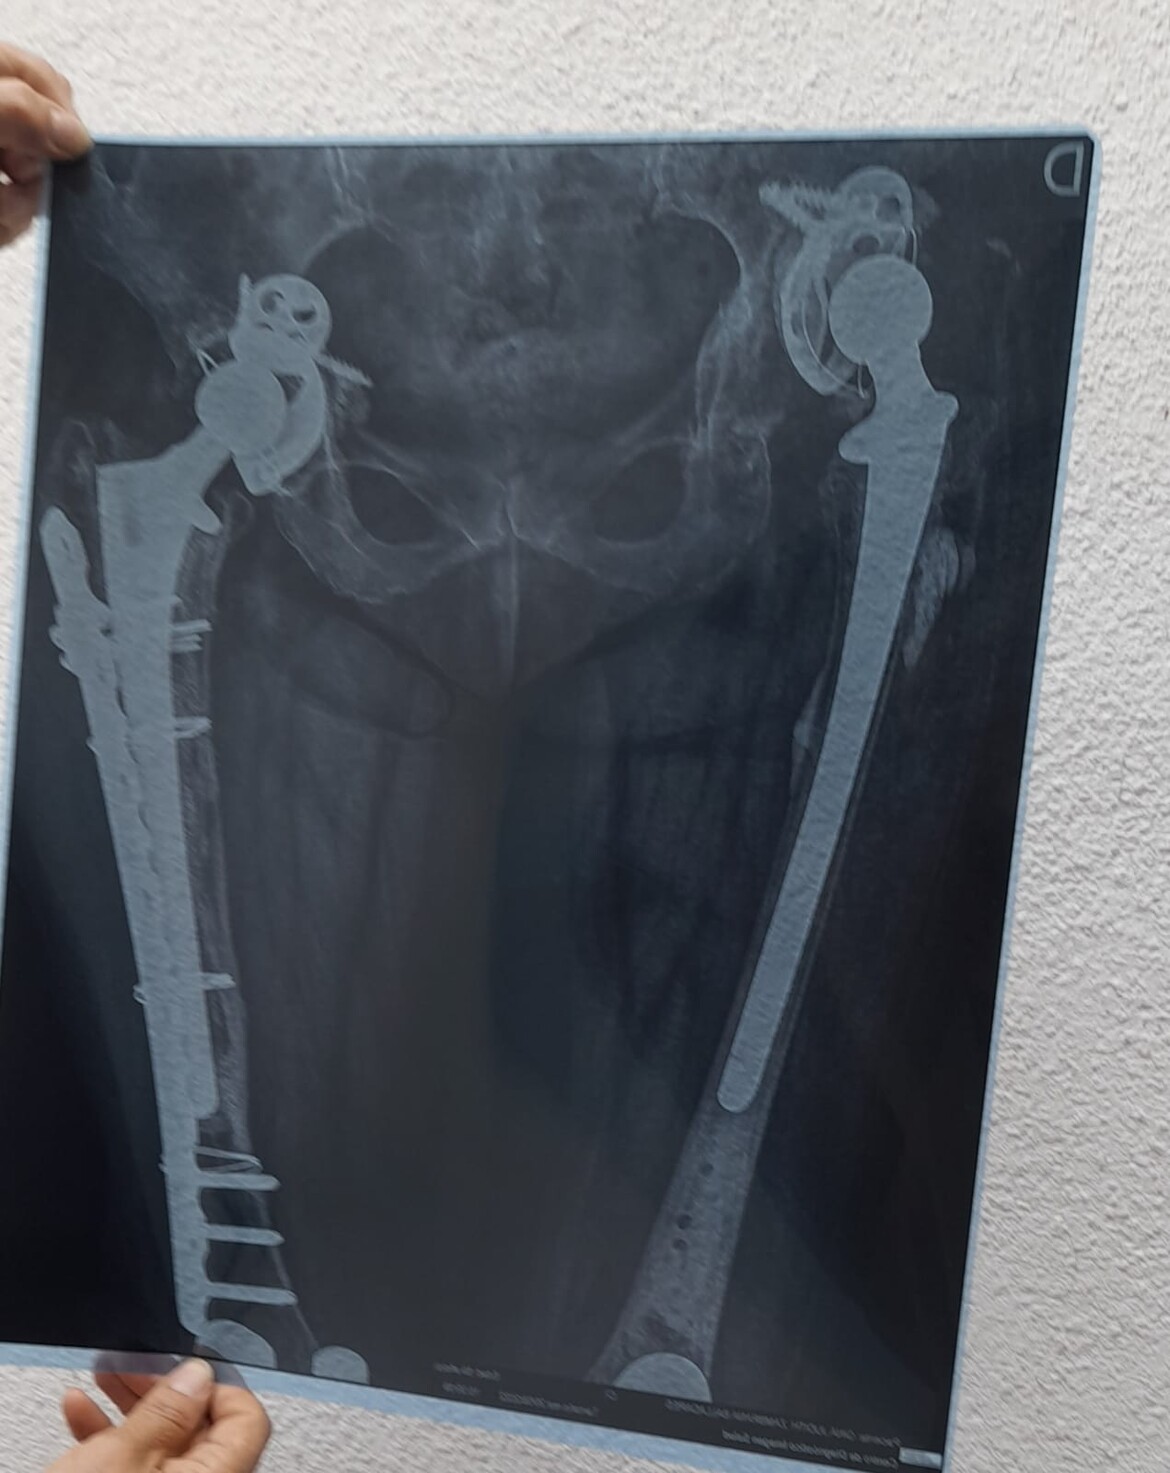 Damaged hip replacement radiography